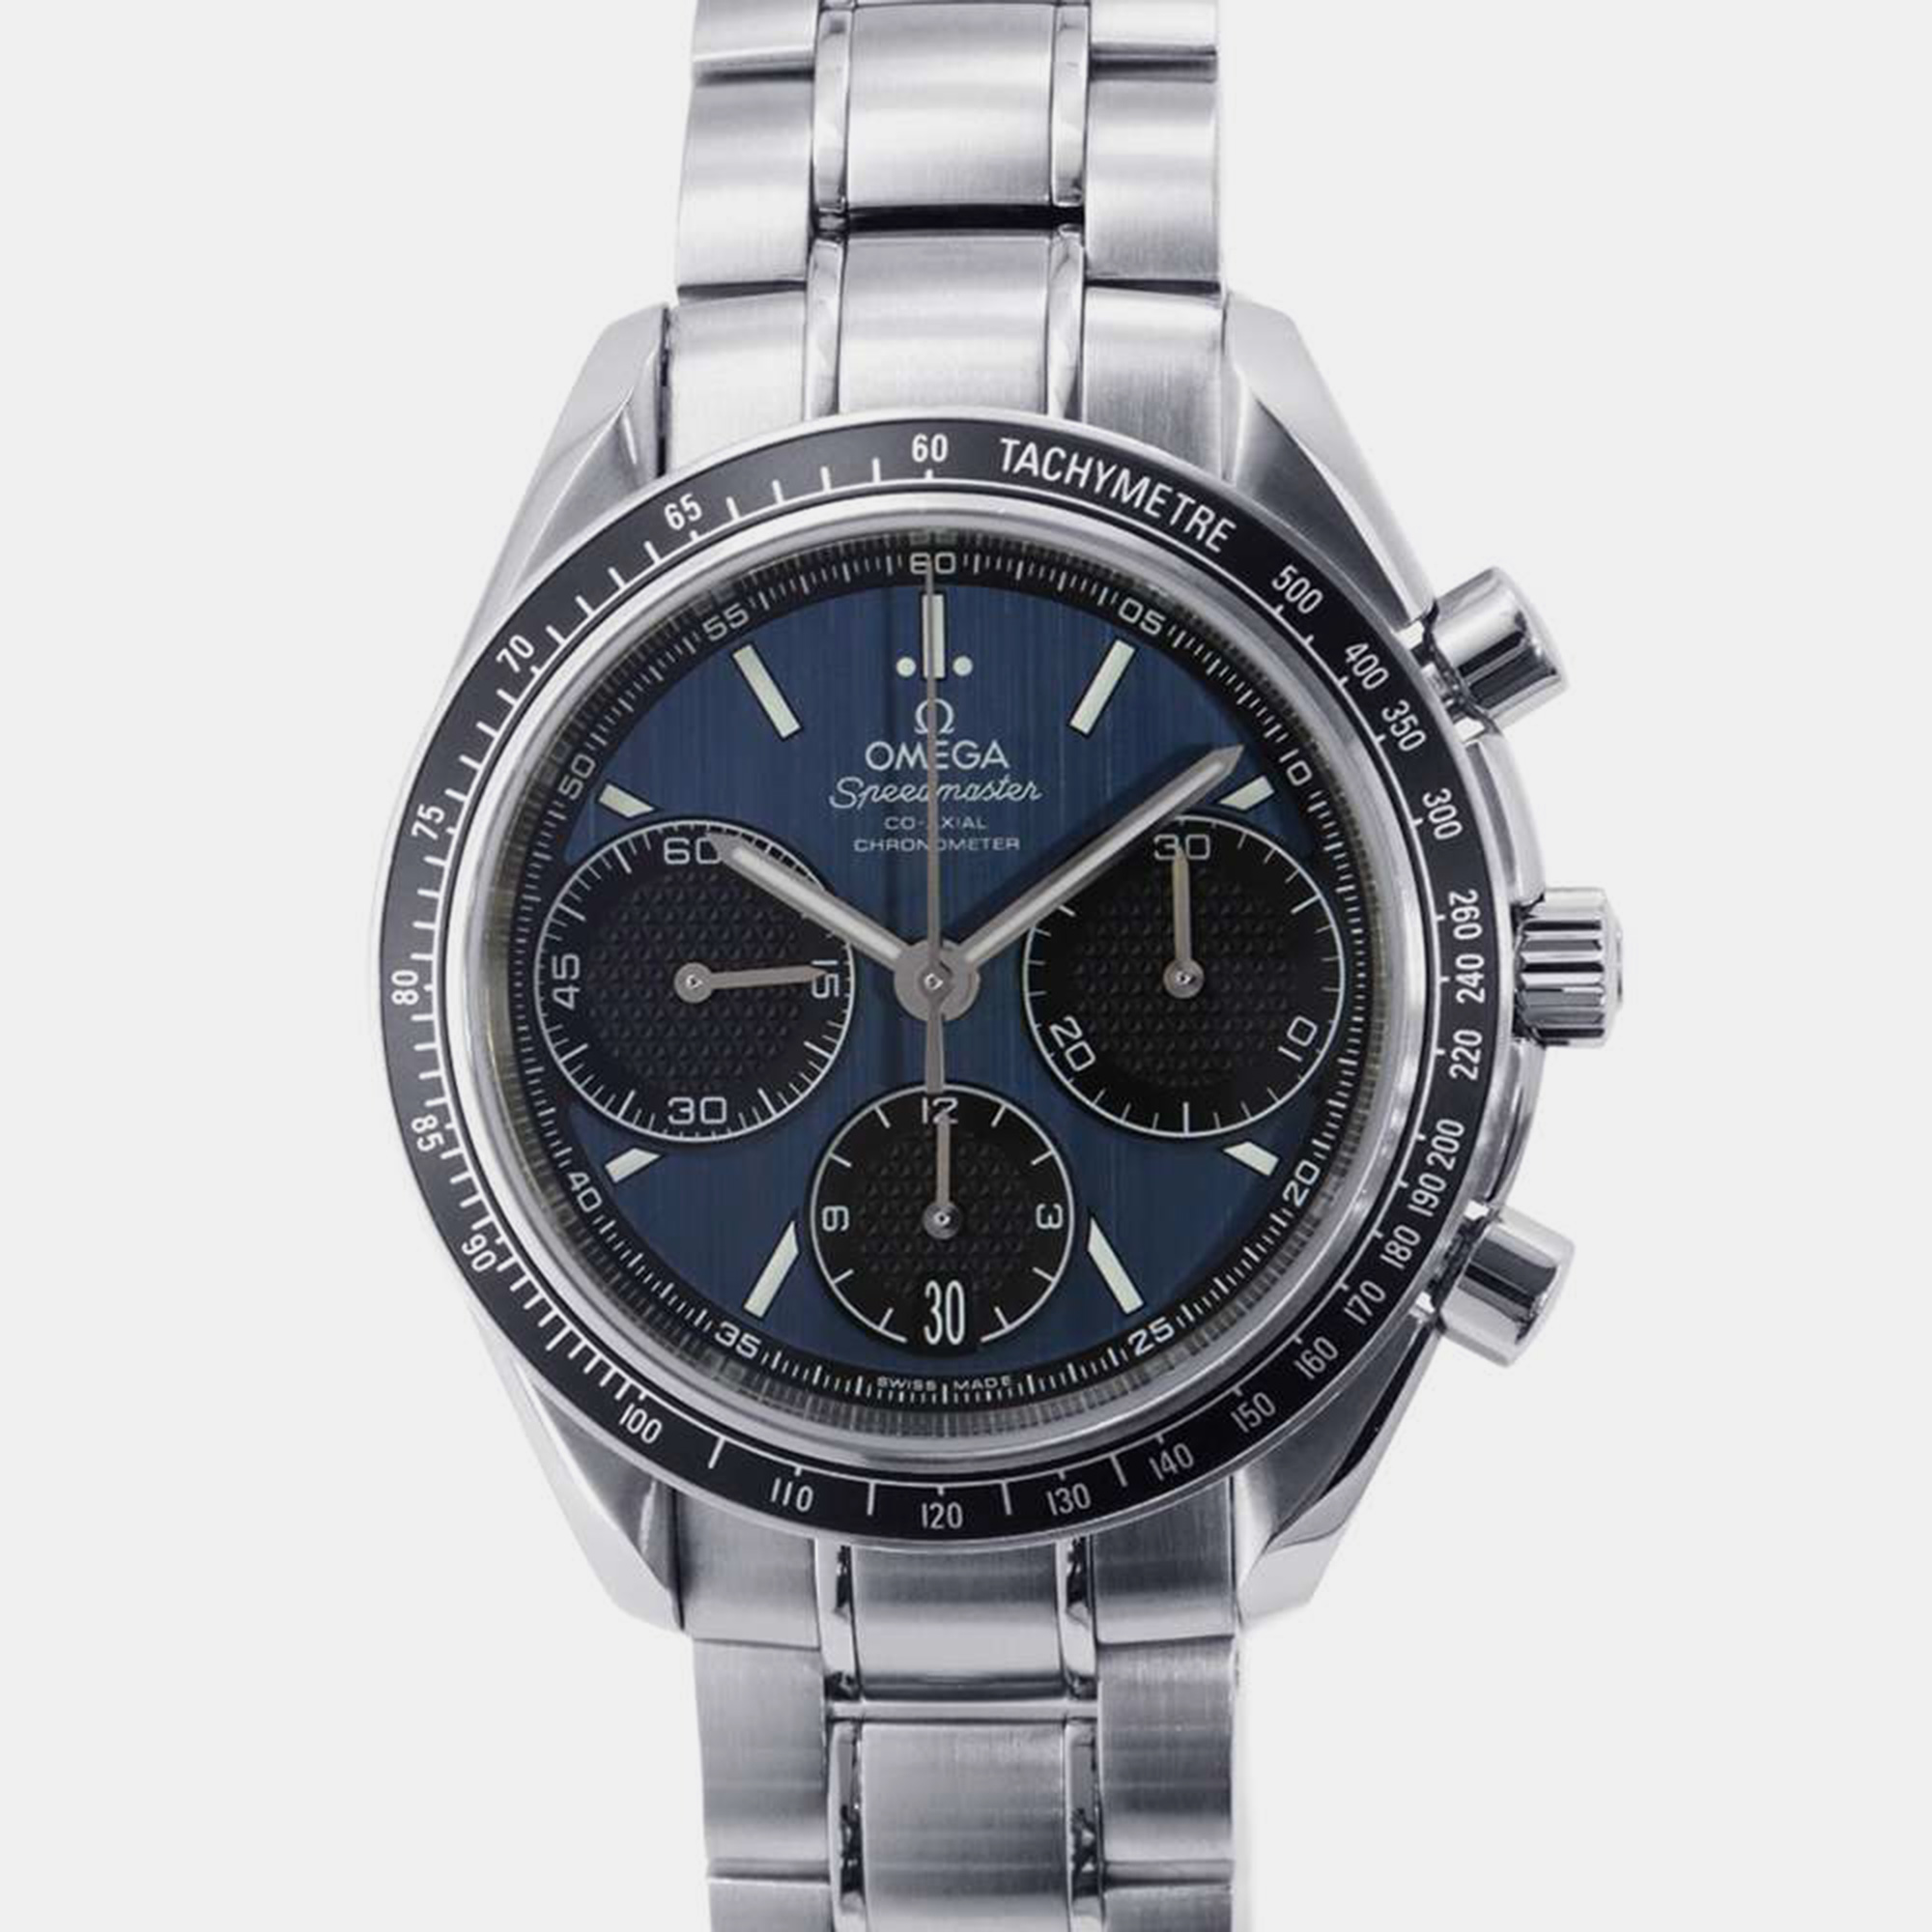 Omega blue stainless steel speedmaster racing automatic men's wristwatch 40 mm